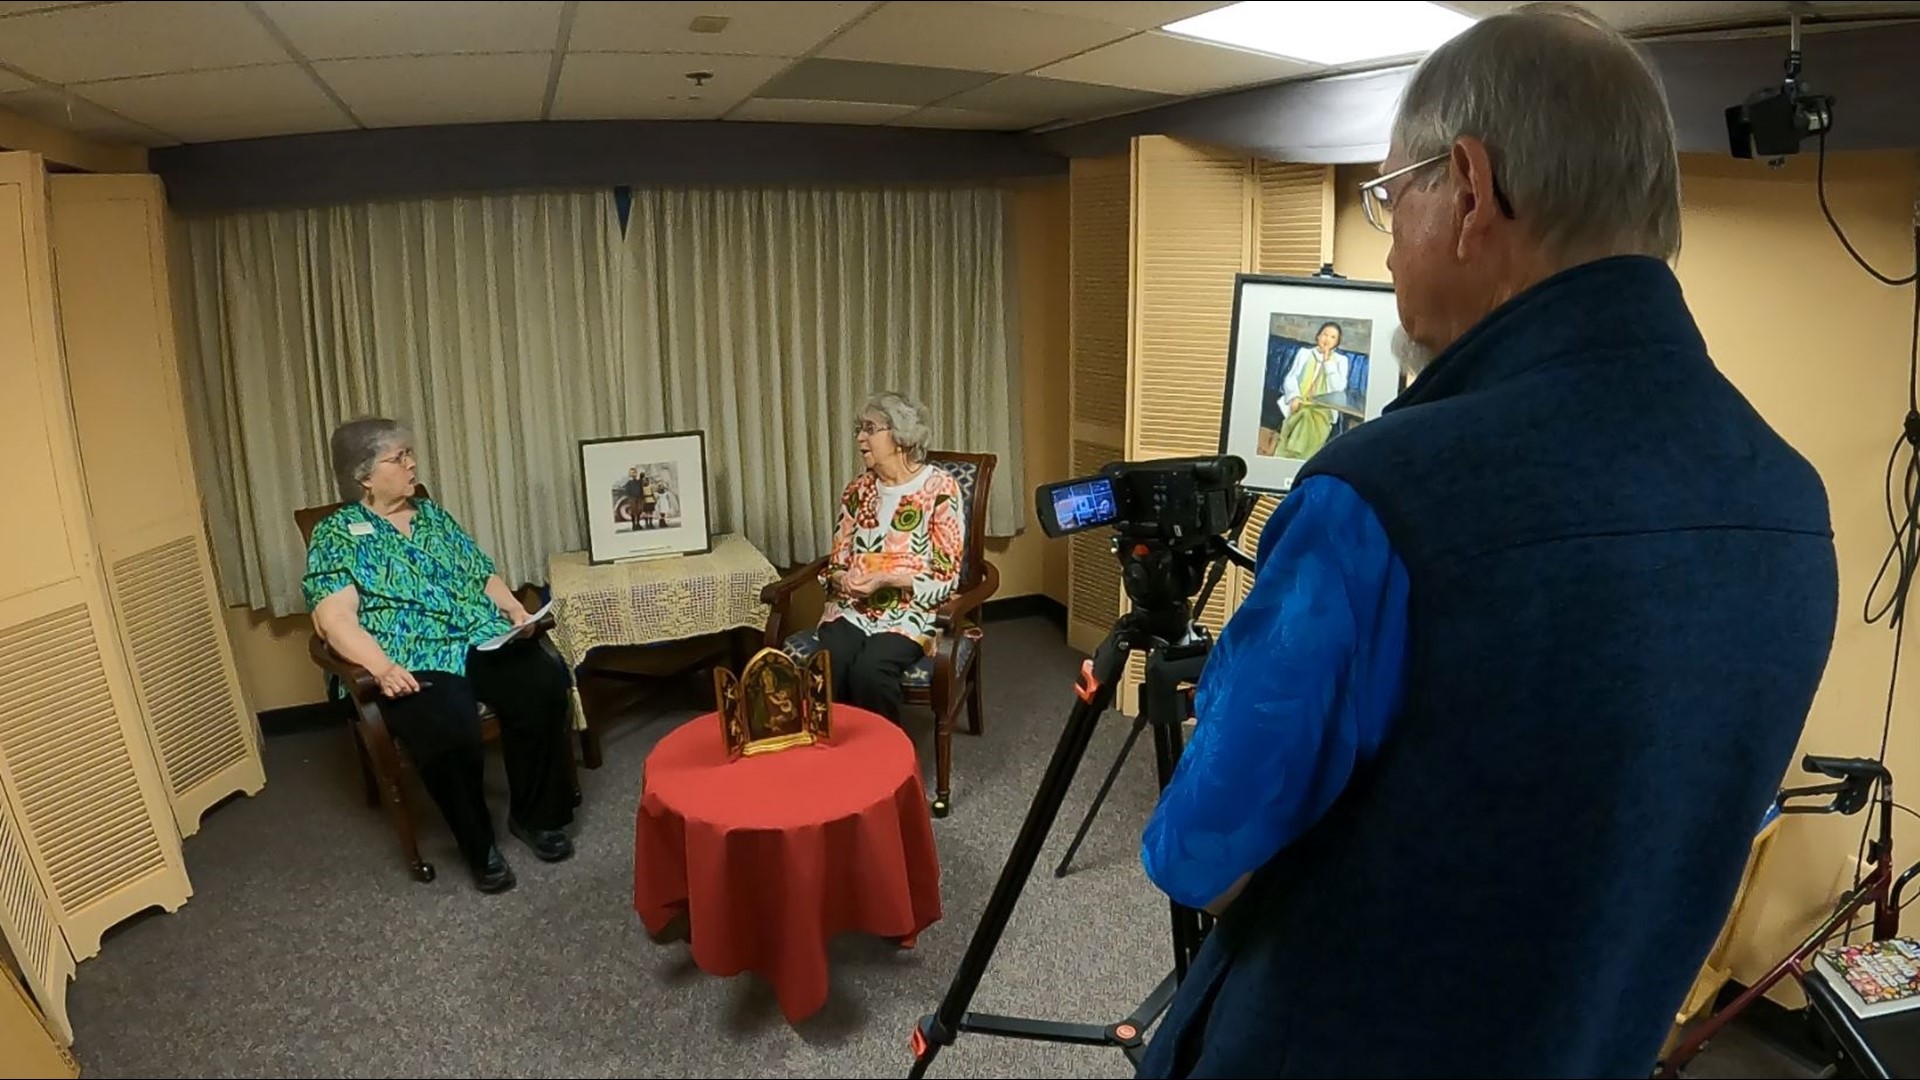 Meet the senior citizens behind the only TV station run entirely by residents of a retirement home. #k5evening